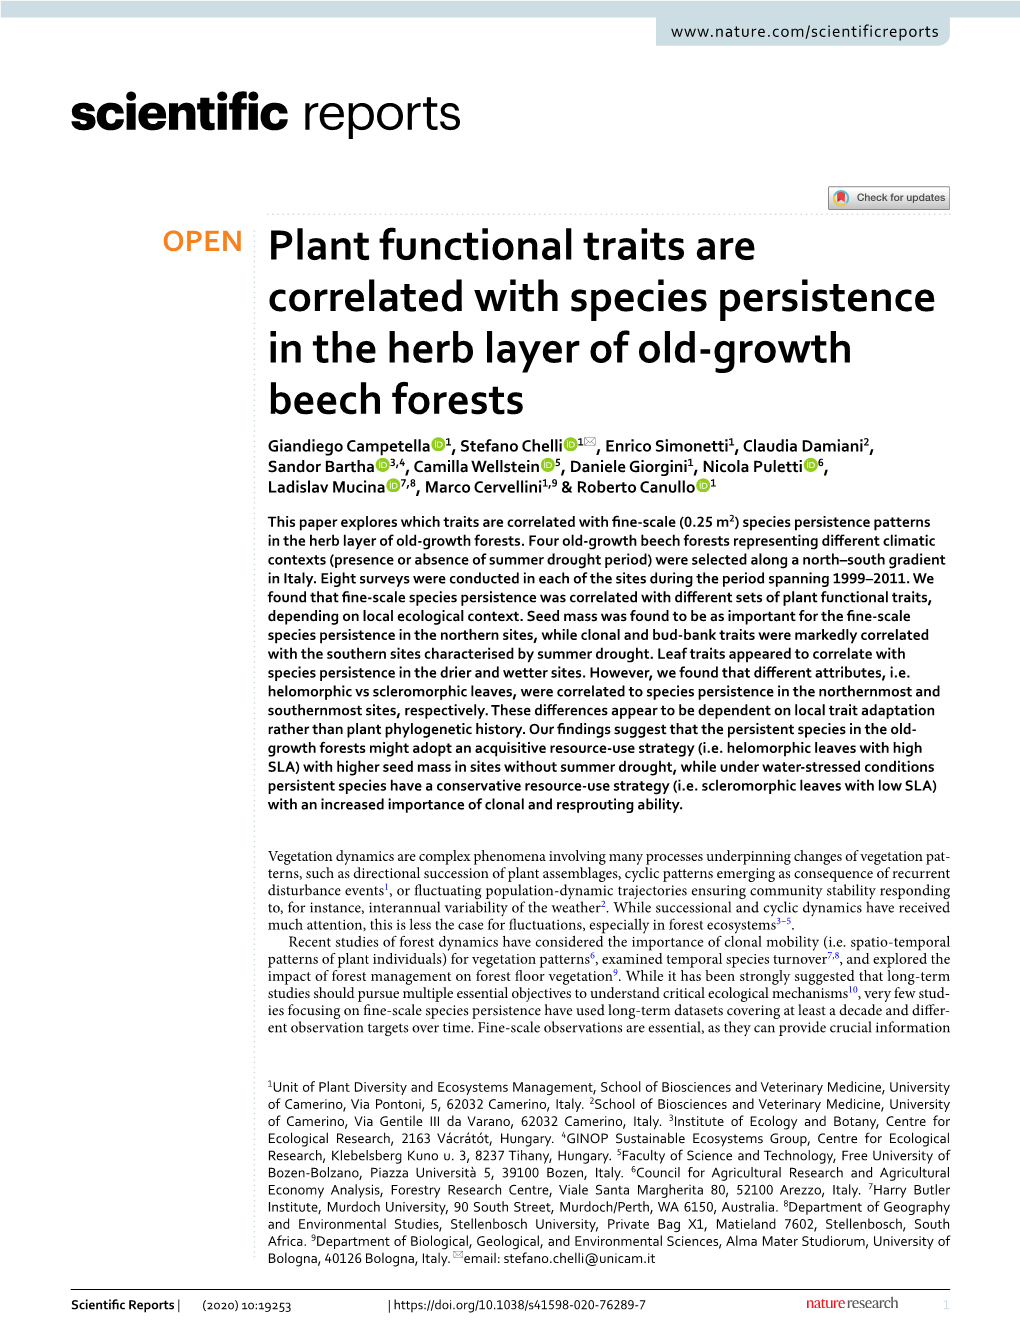 Plant Functional Traits Are Correlated with Species Persistence in the Herb